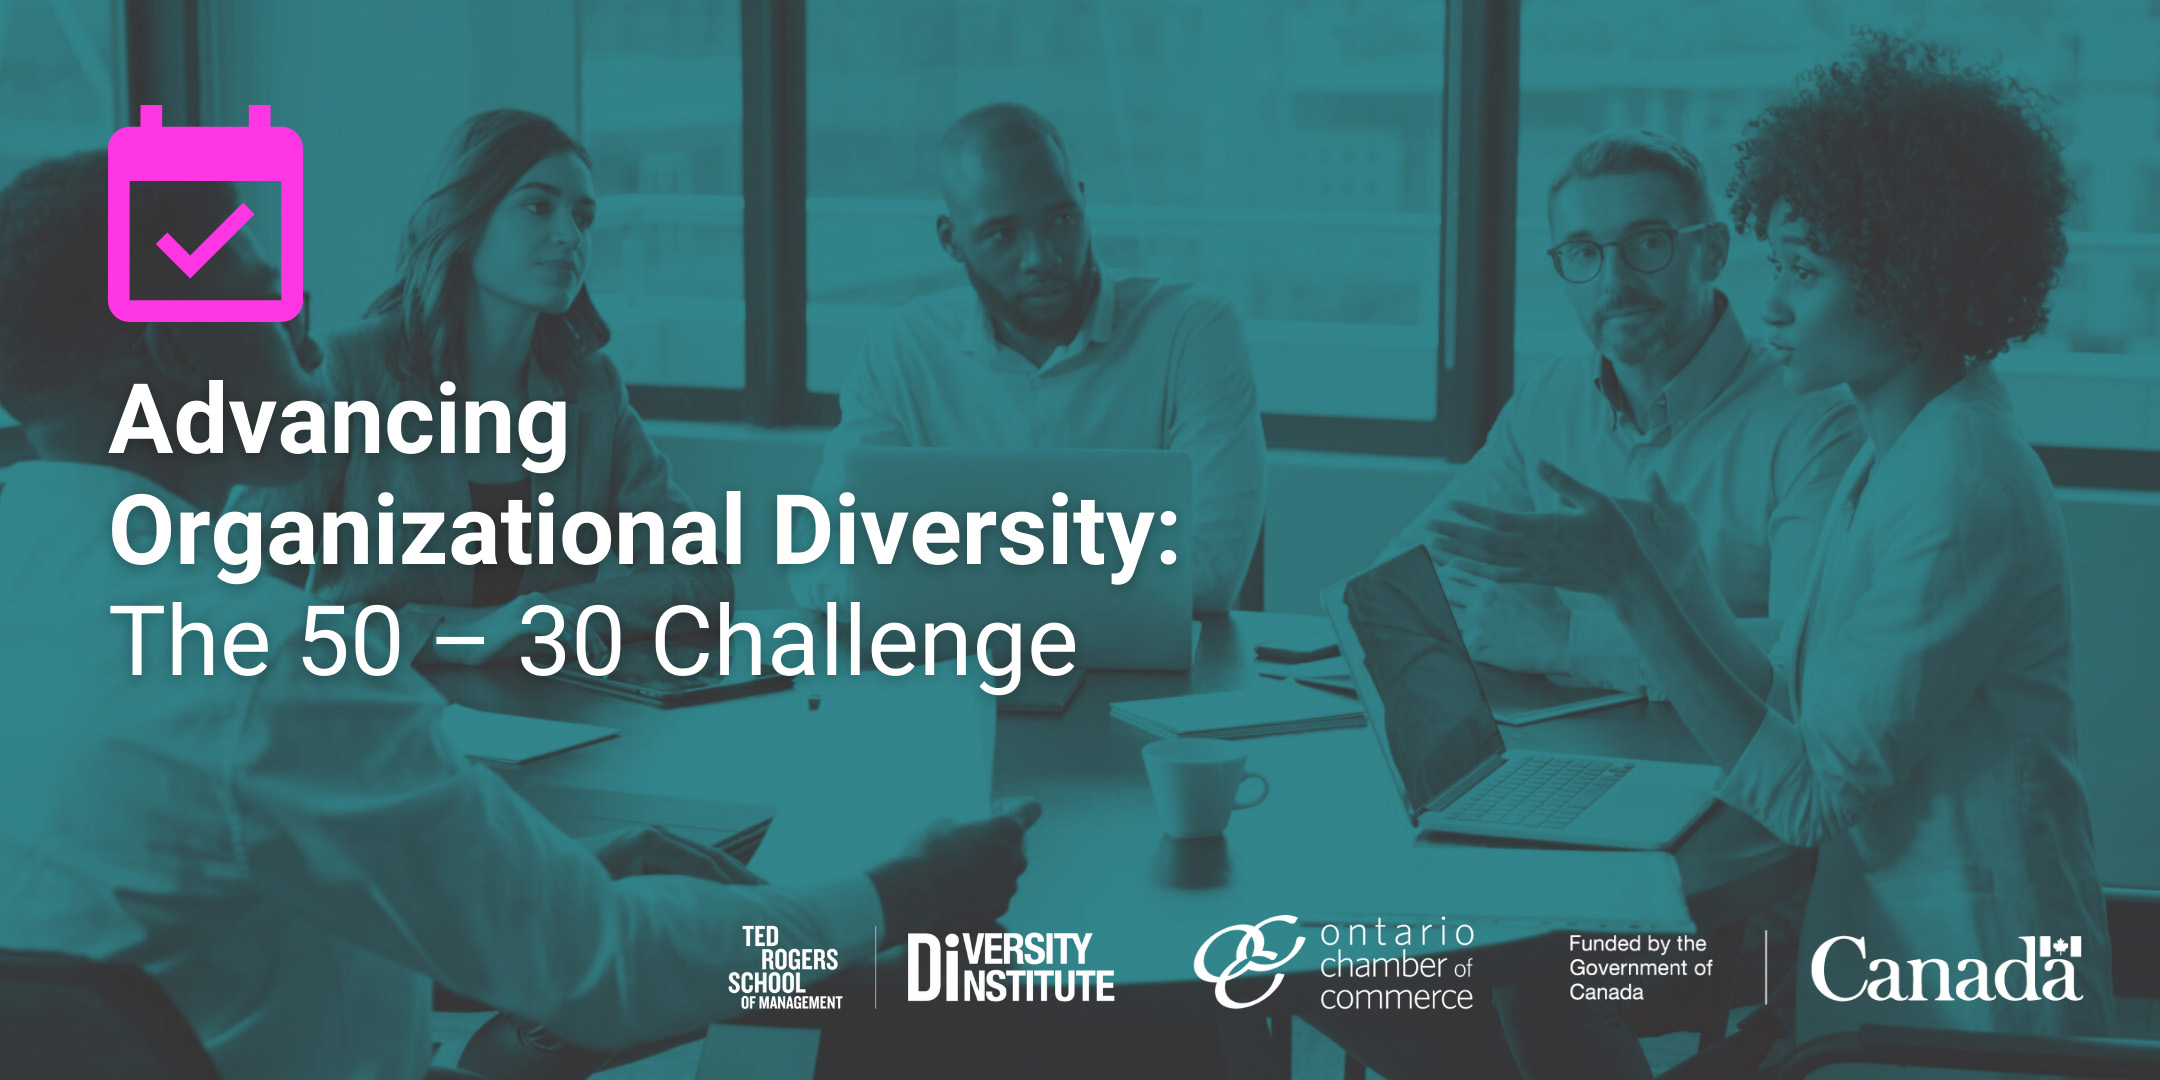 The event title, “Advancing Organizational Diversity: The 50 - 30 Challenge”  atop a blue-washed photograph of five individuals meeting in a conference room